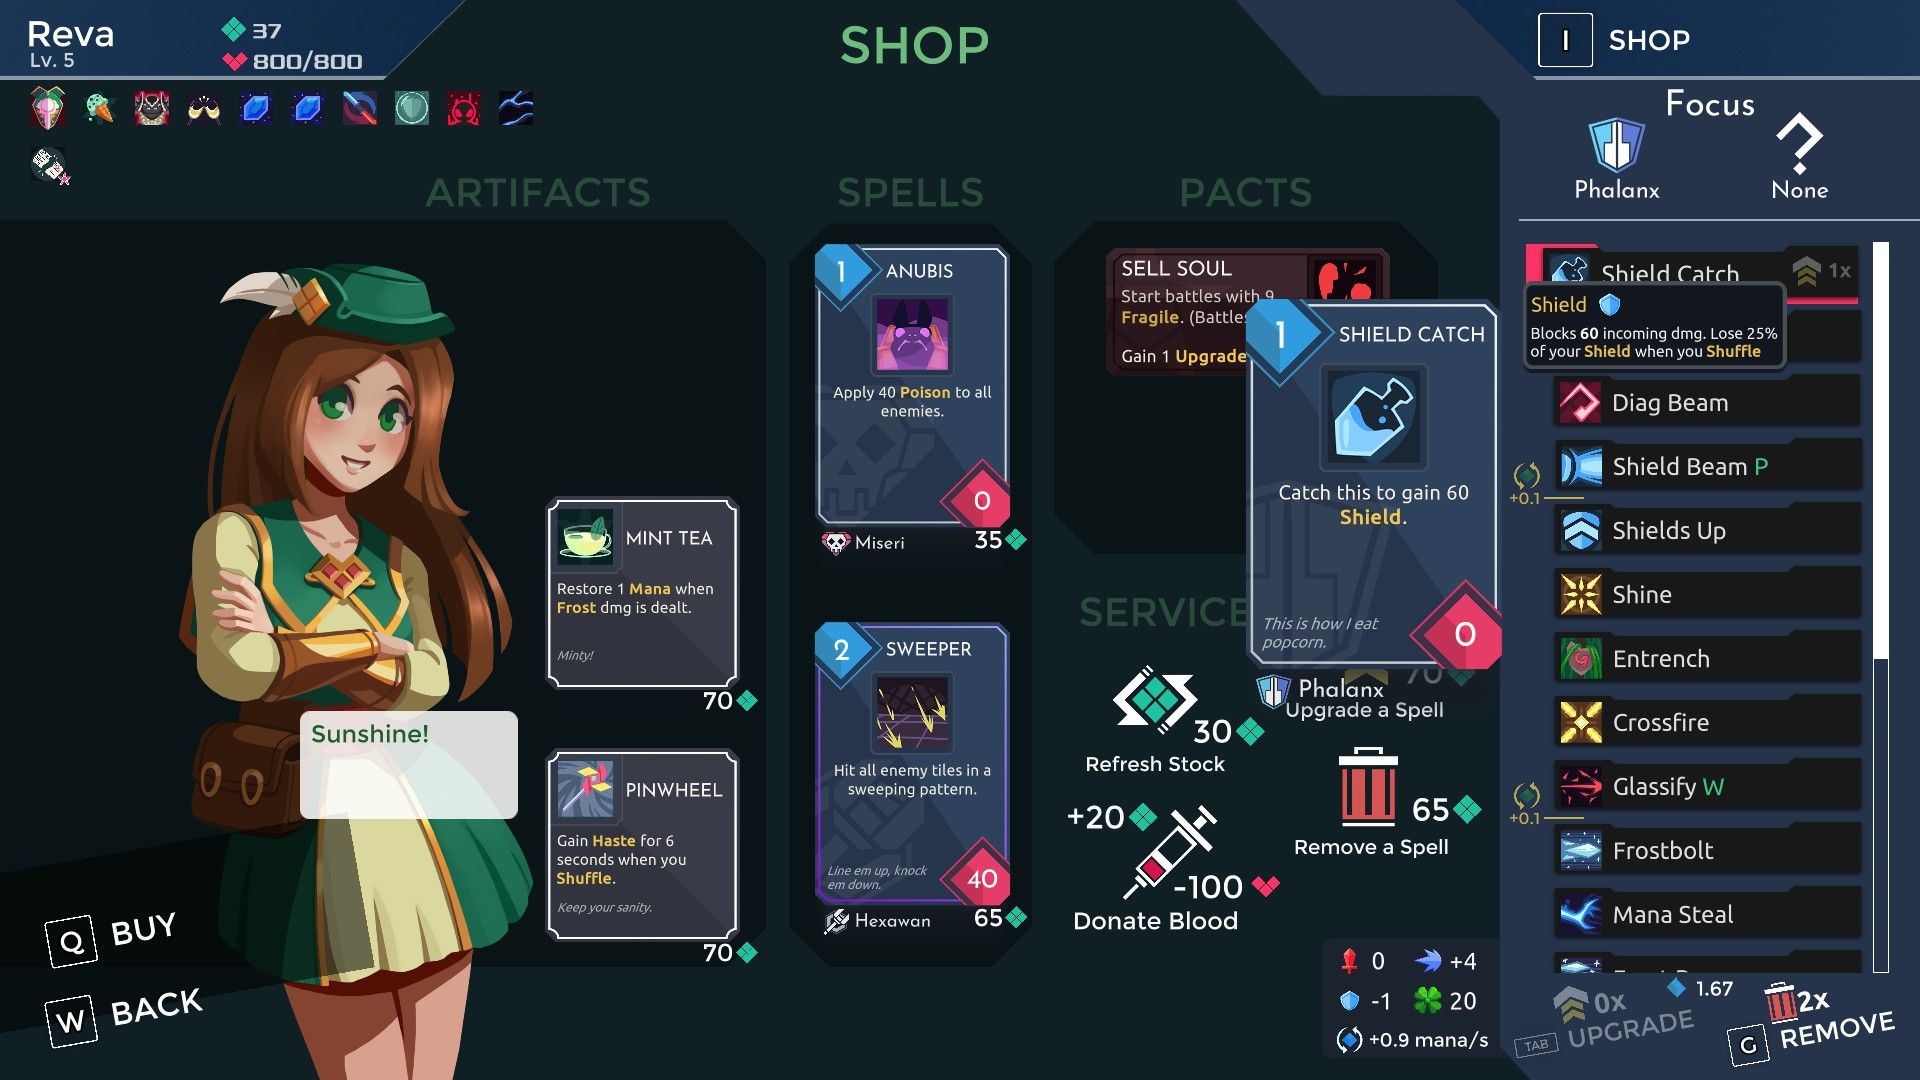 One Step From Eden Review The Evolution of Deckbuilding Roguelikes